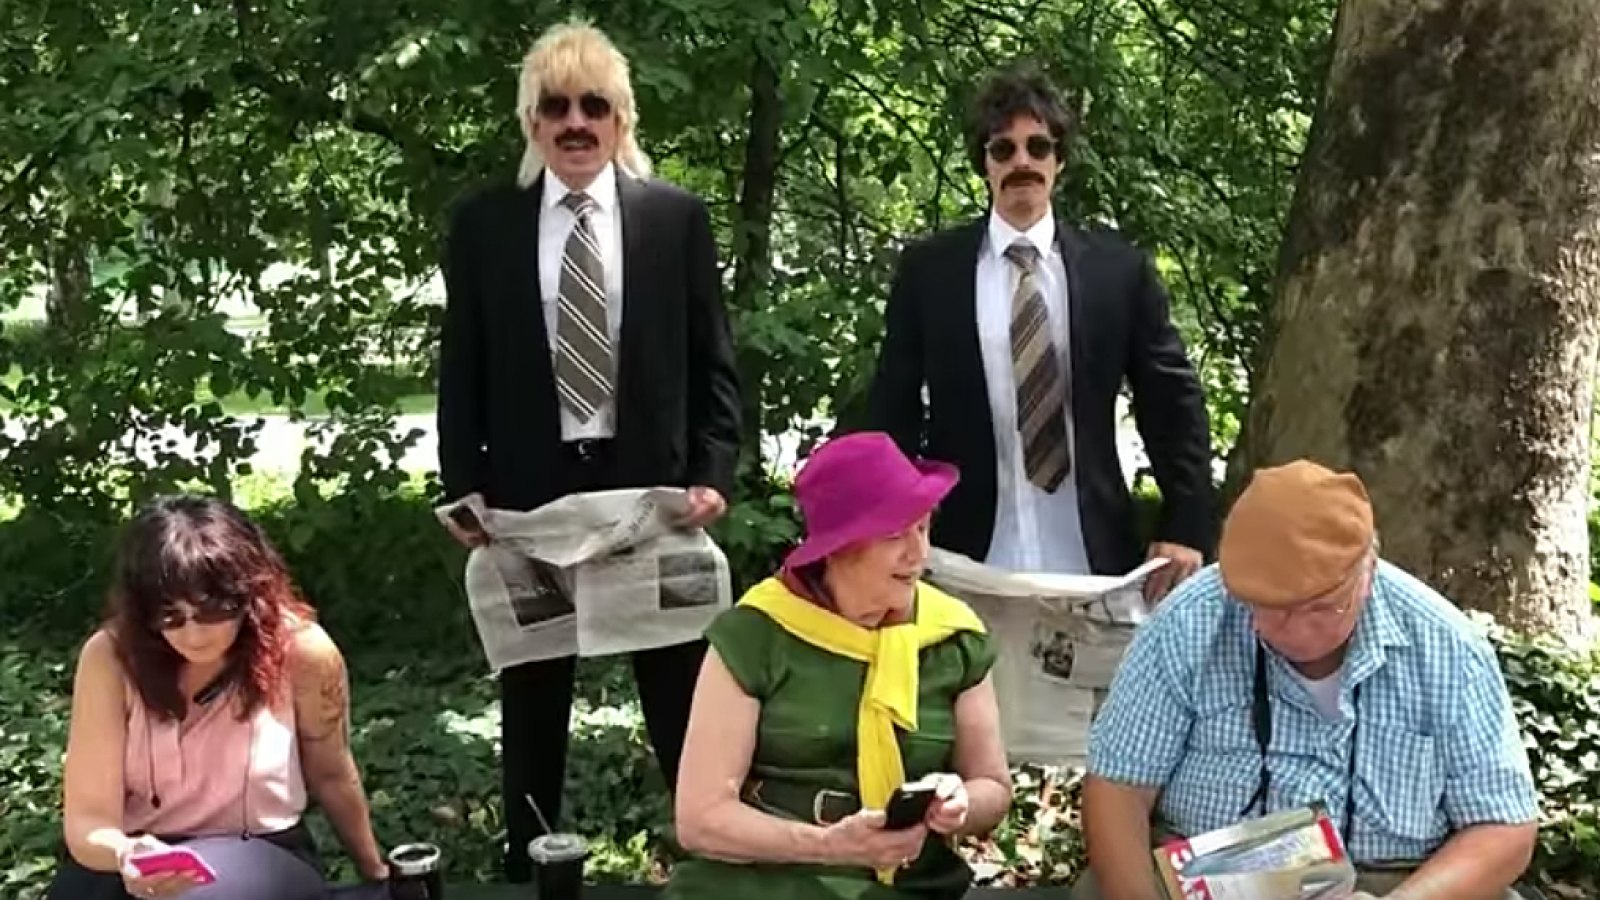 Justin Bieber and Jimmy Fallon Go Unnoticed While Dancing in Disguises in Central Park